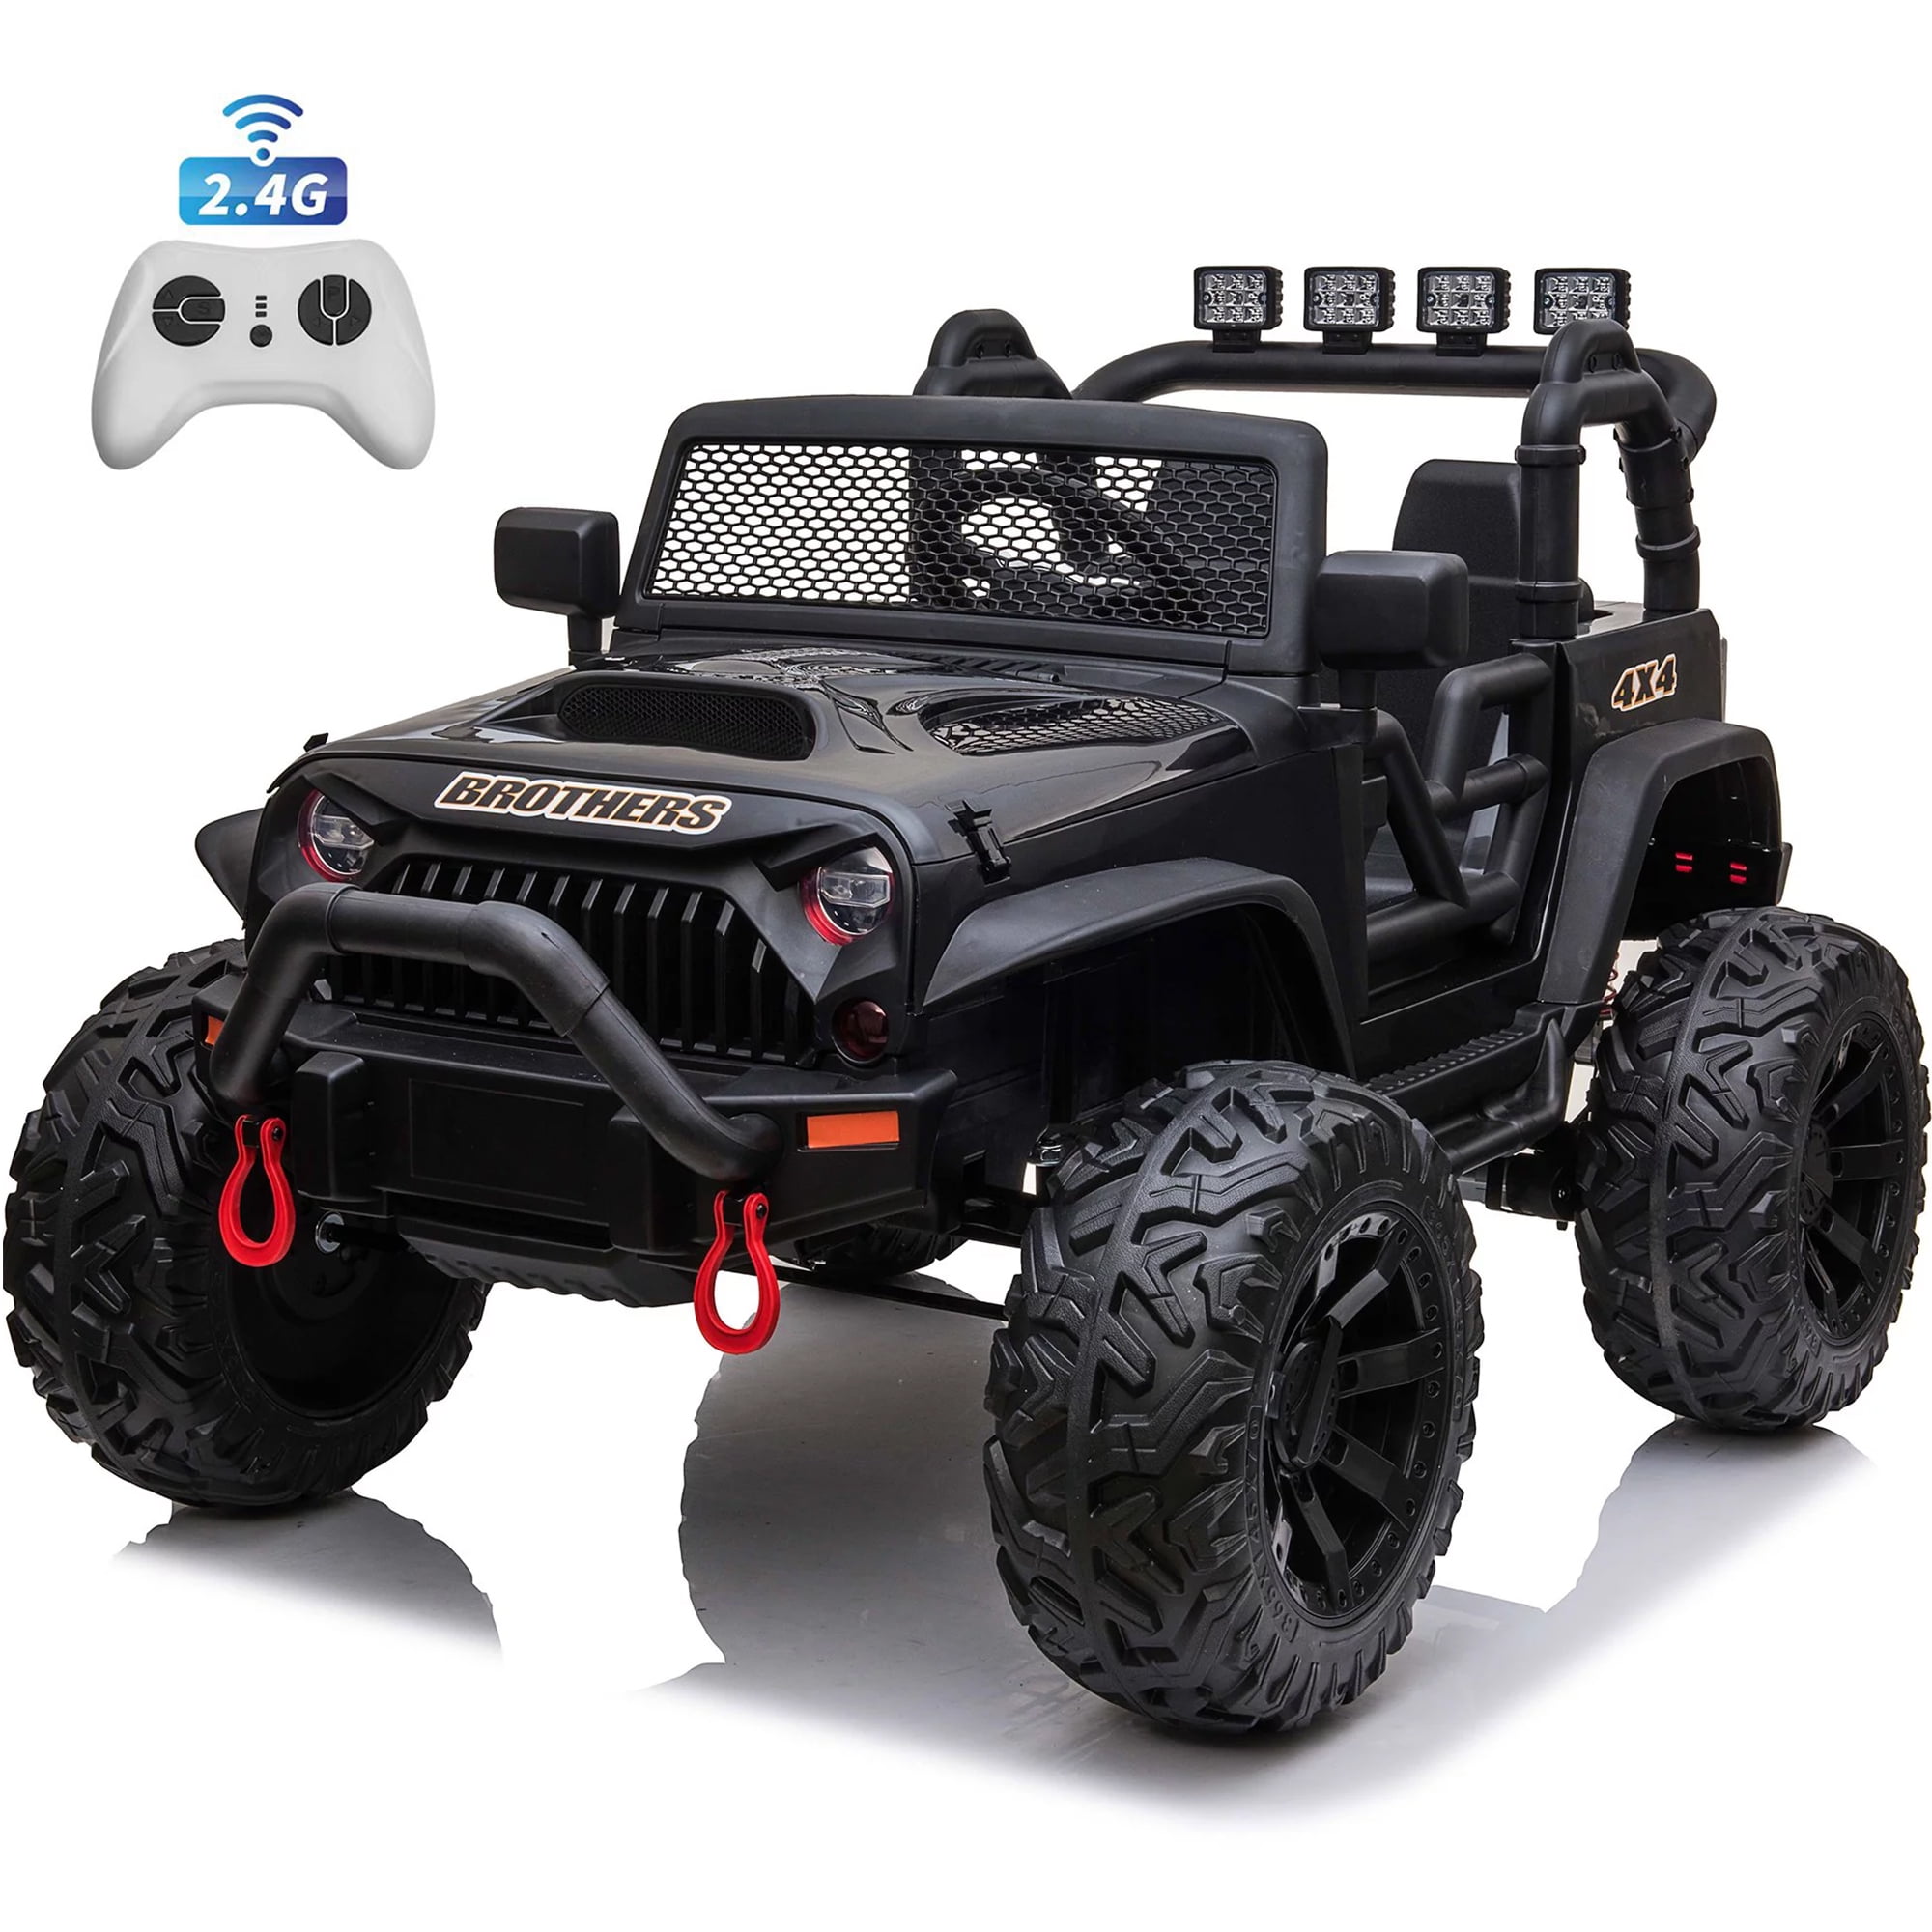 Joyracer-24V-Kids-Ride-Truck-Car-Remote-Control-2-Seater-2-200W-Motor-9-AH-Battery-Powered-Toy-w-Spring-Suspension-4-Large-Wheels-3-Speeds-LED-Lights_27b0586e-fa3c-4101-8a22-44b162bec4ff.c25ae4b308c9d46341d0a6e138c3dbe5.jpeg